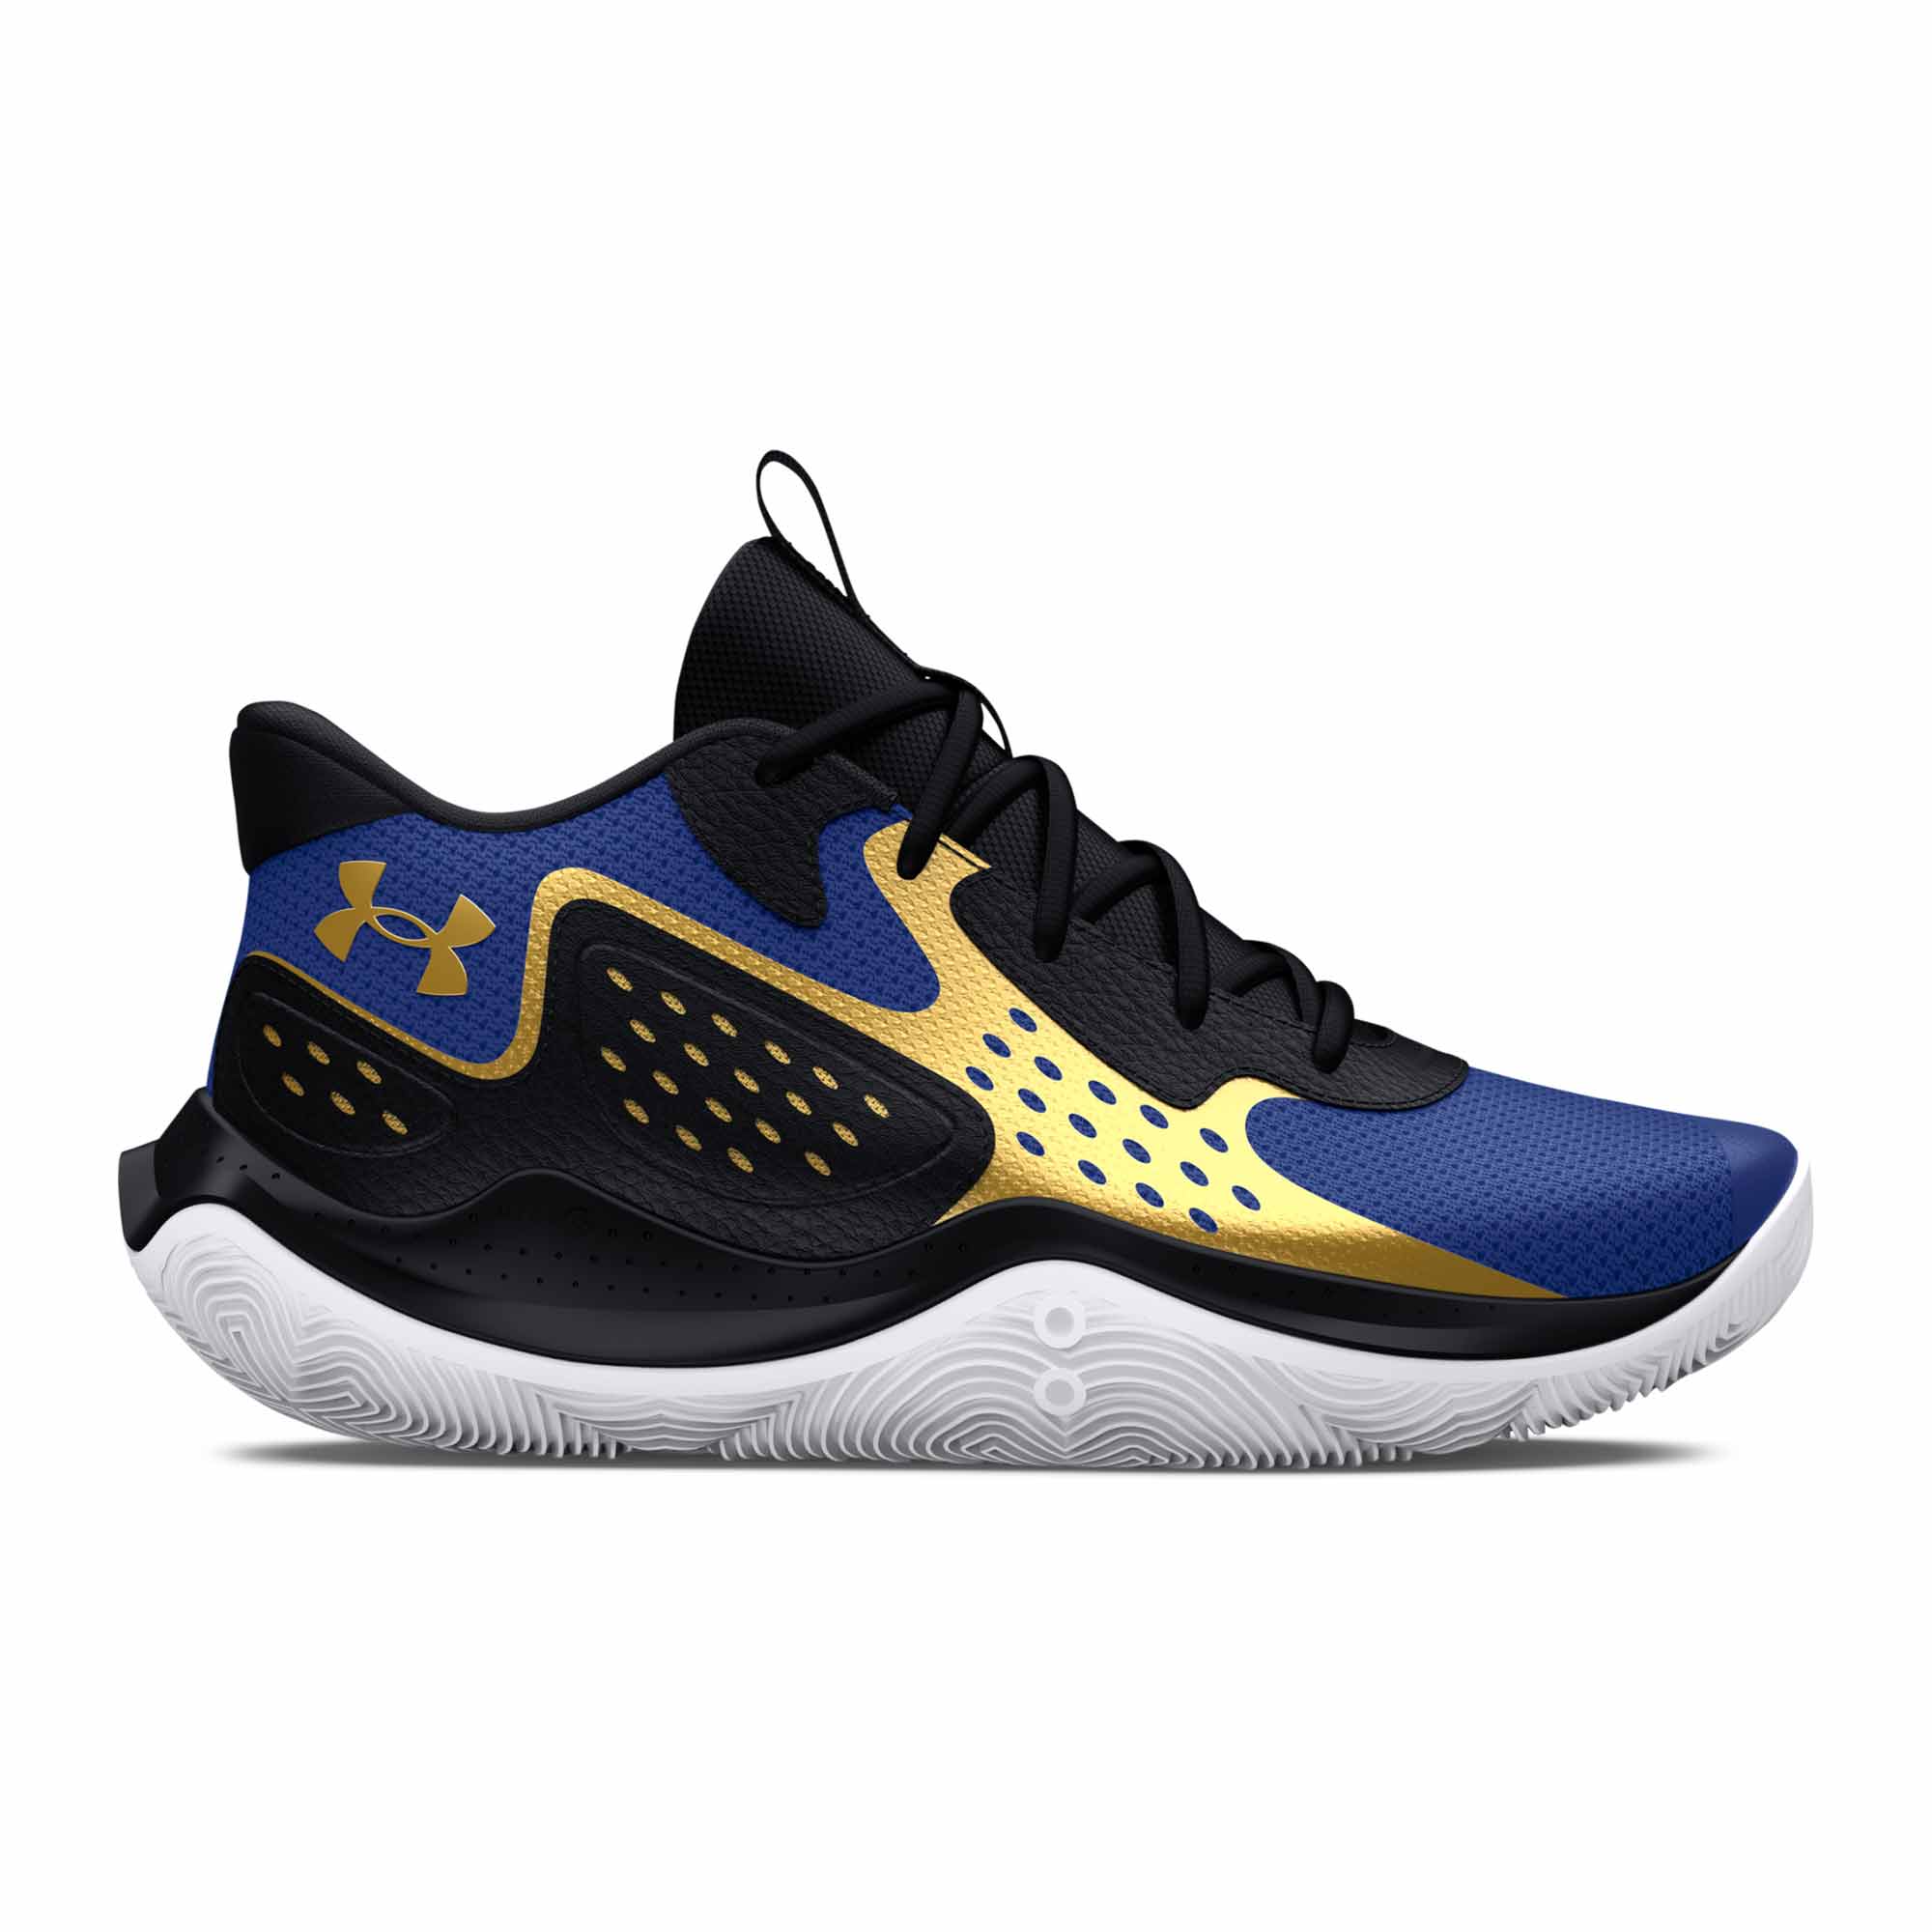 Under Armour Unisex Jet 23 Basketball Shoes